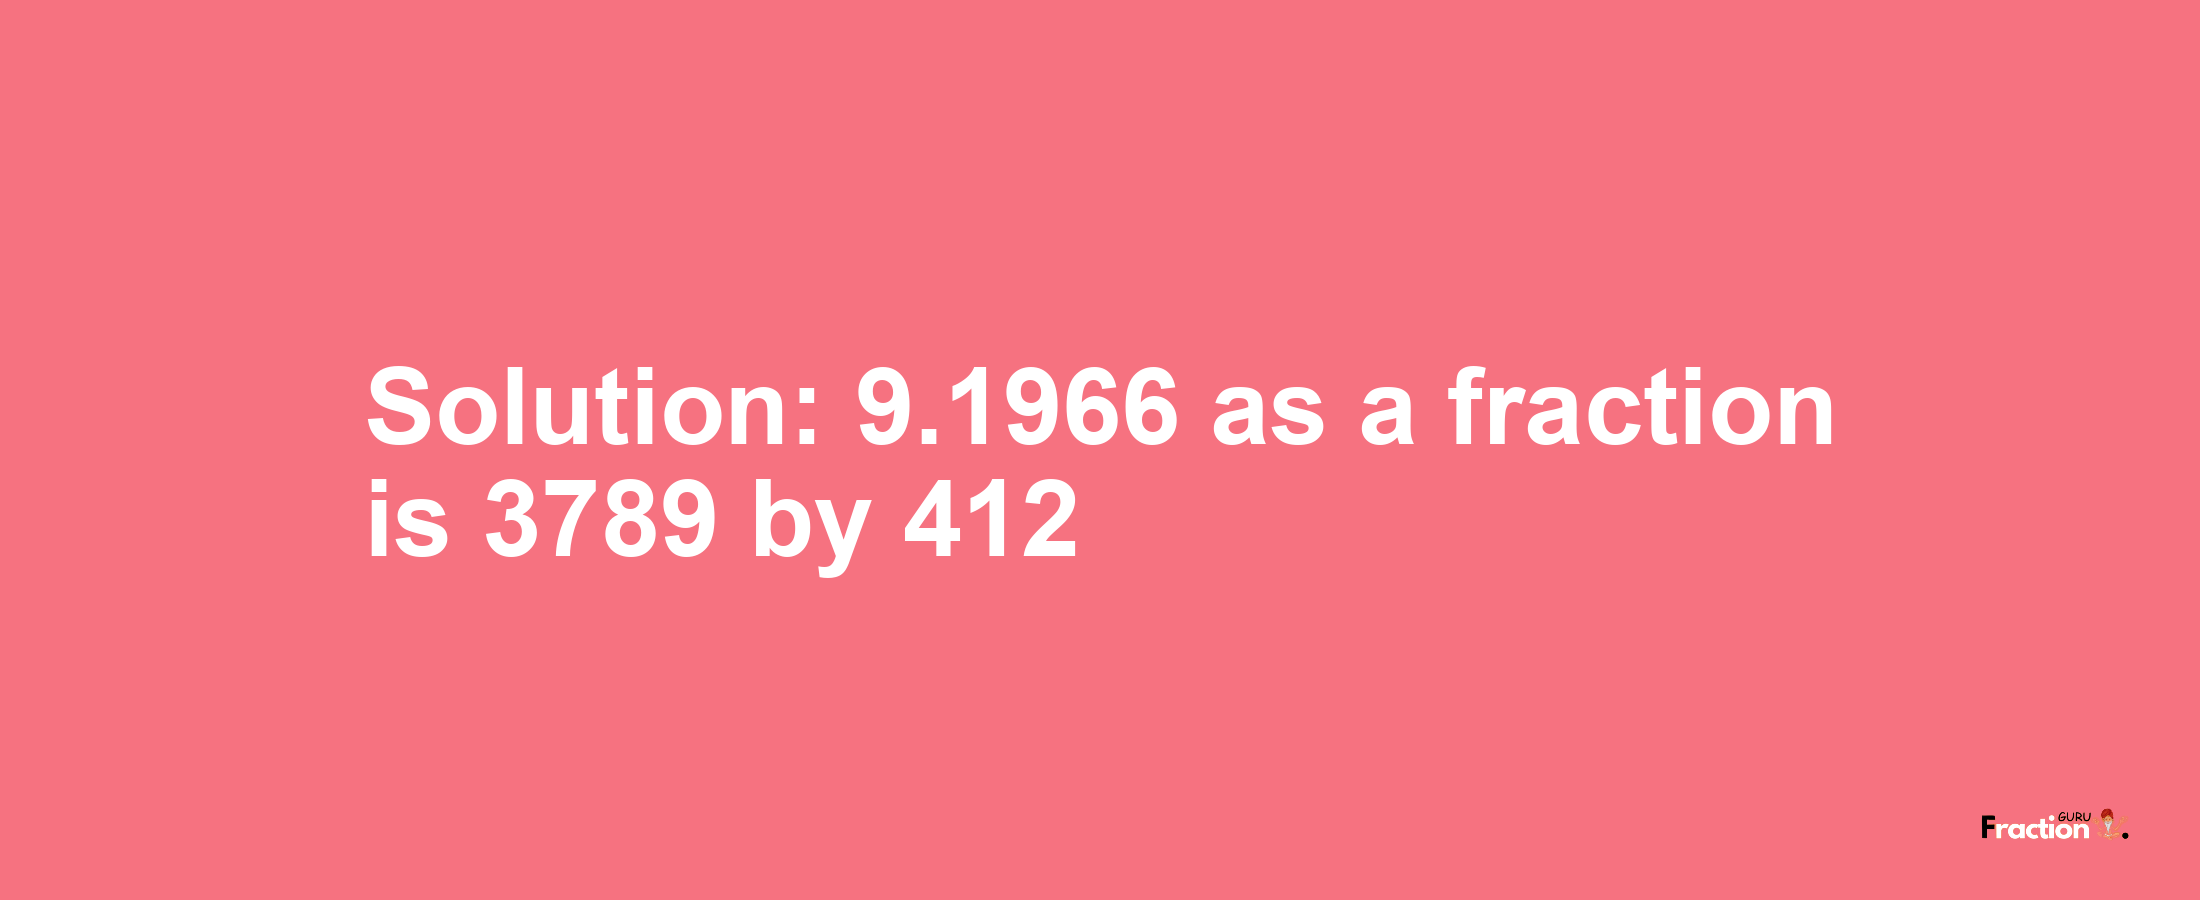 Solution:9.1966 as a fraction is 3789/412